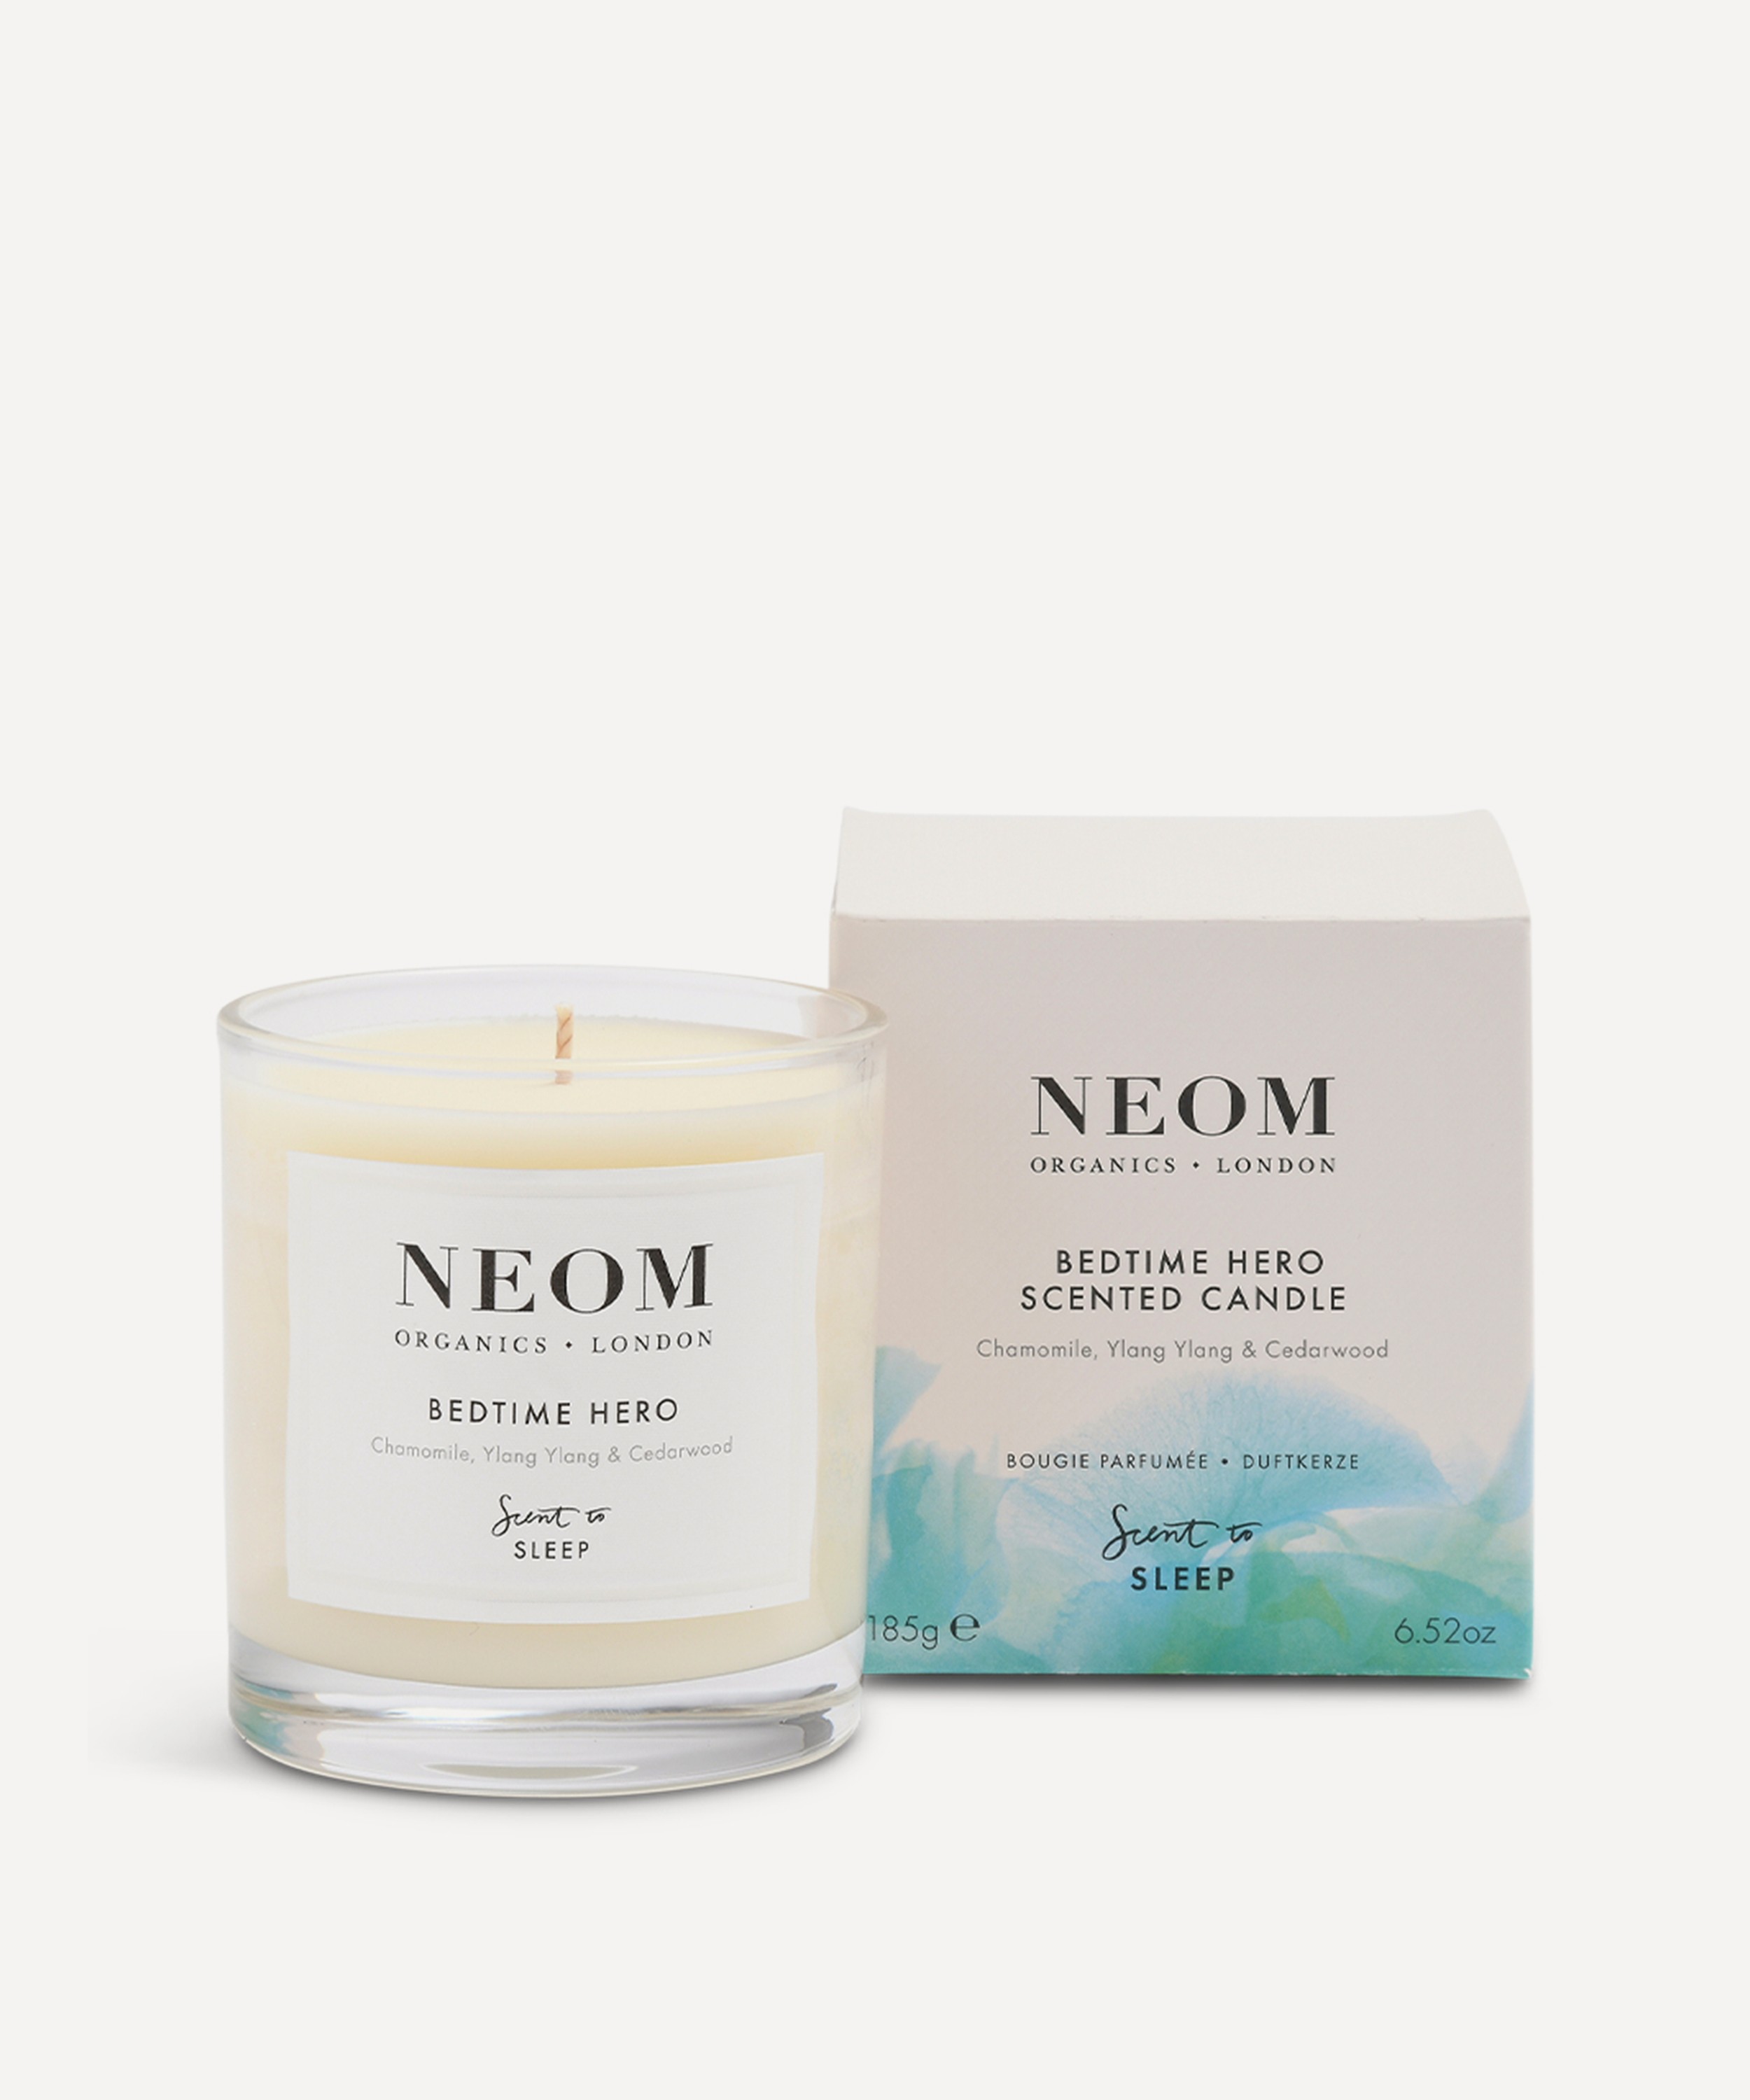 NEOM Organics - Bedtime Hero Scented Candle 185g image number 1